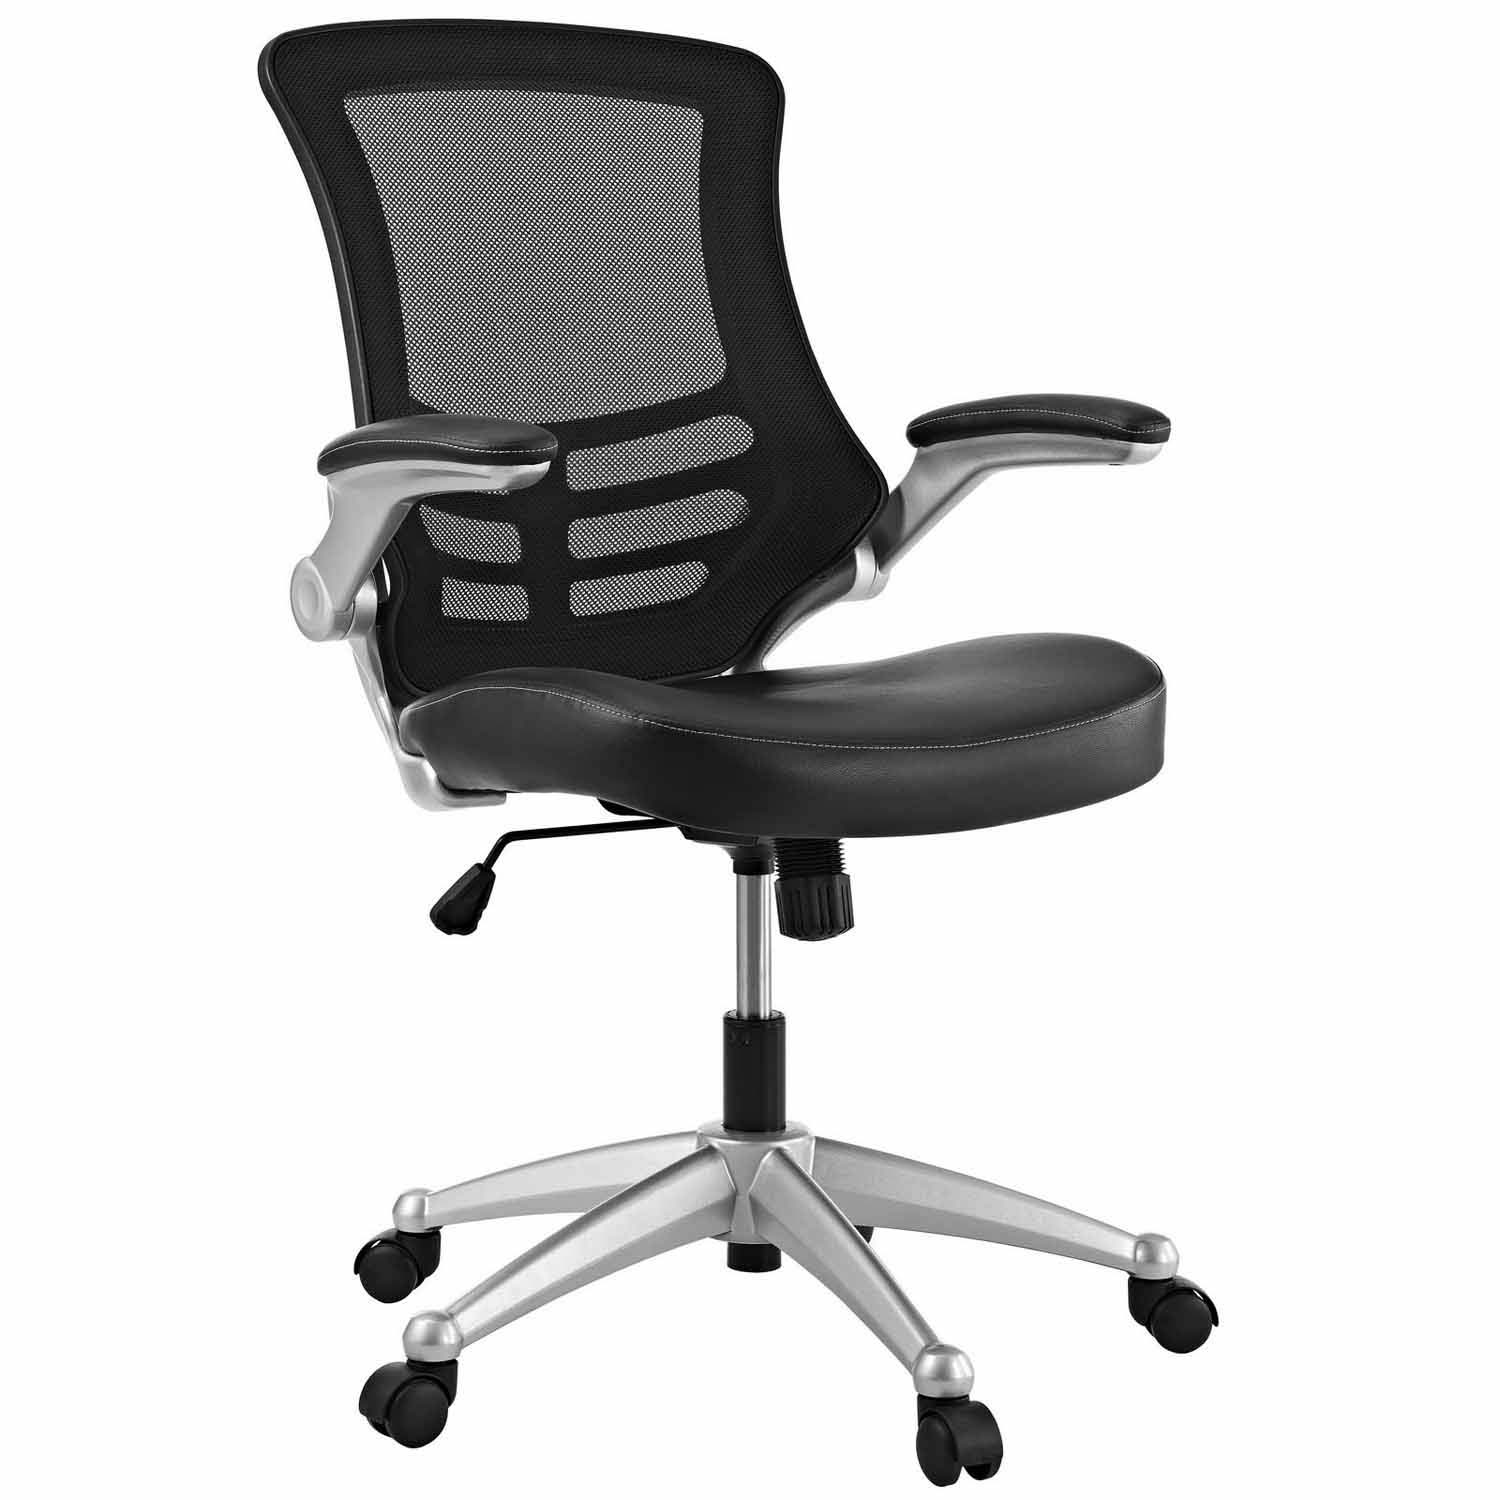 Modway Attainment Office Chair - Black